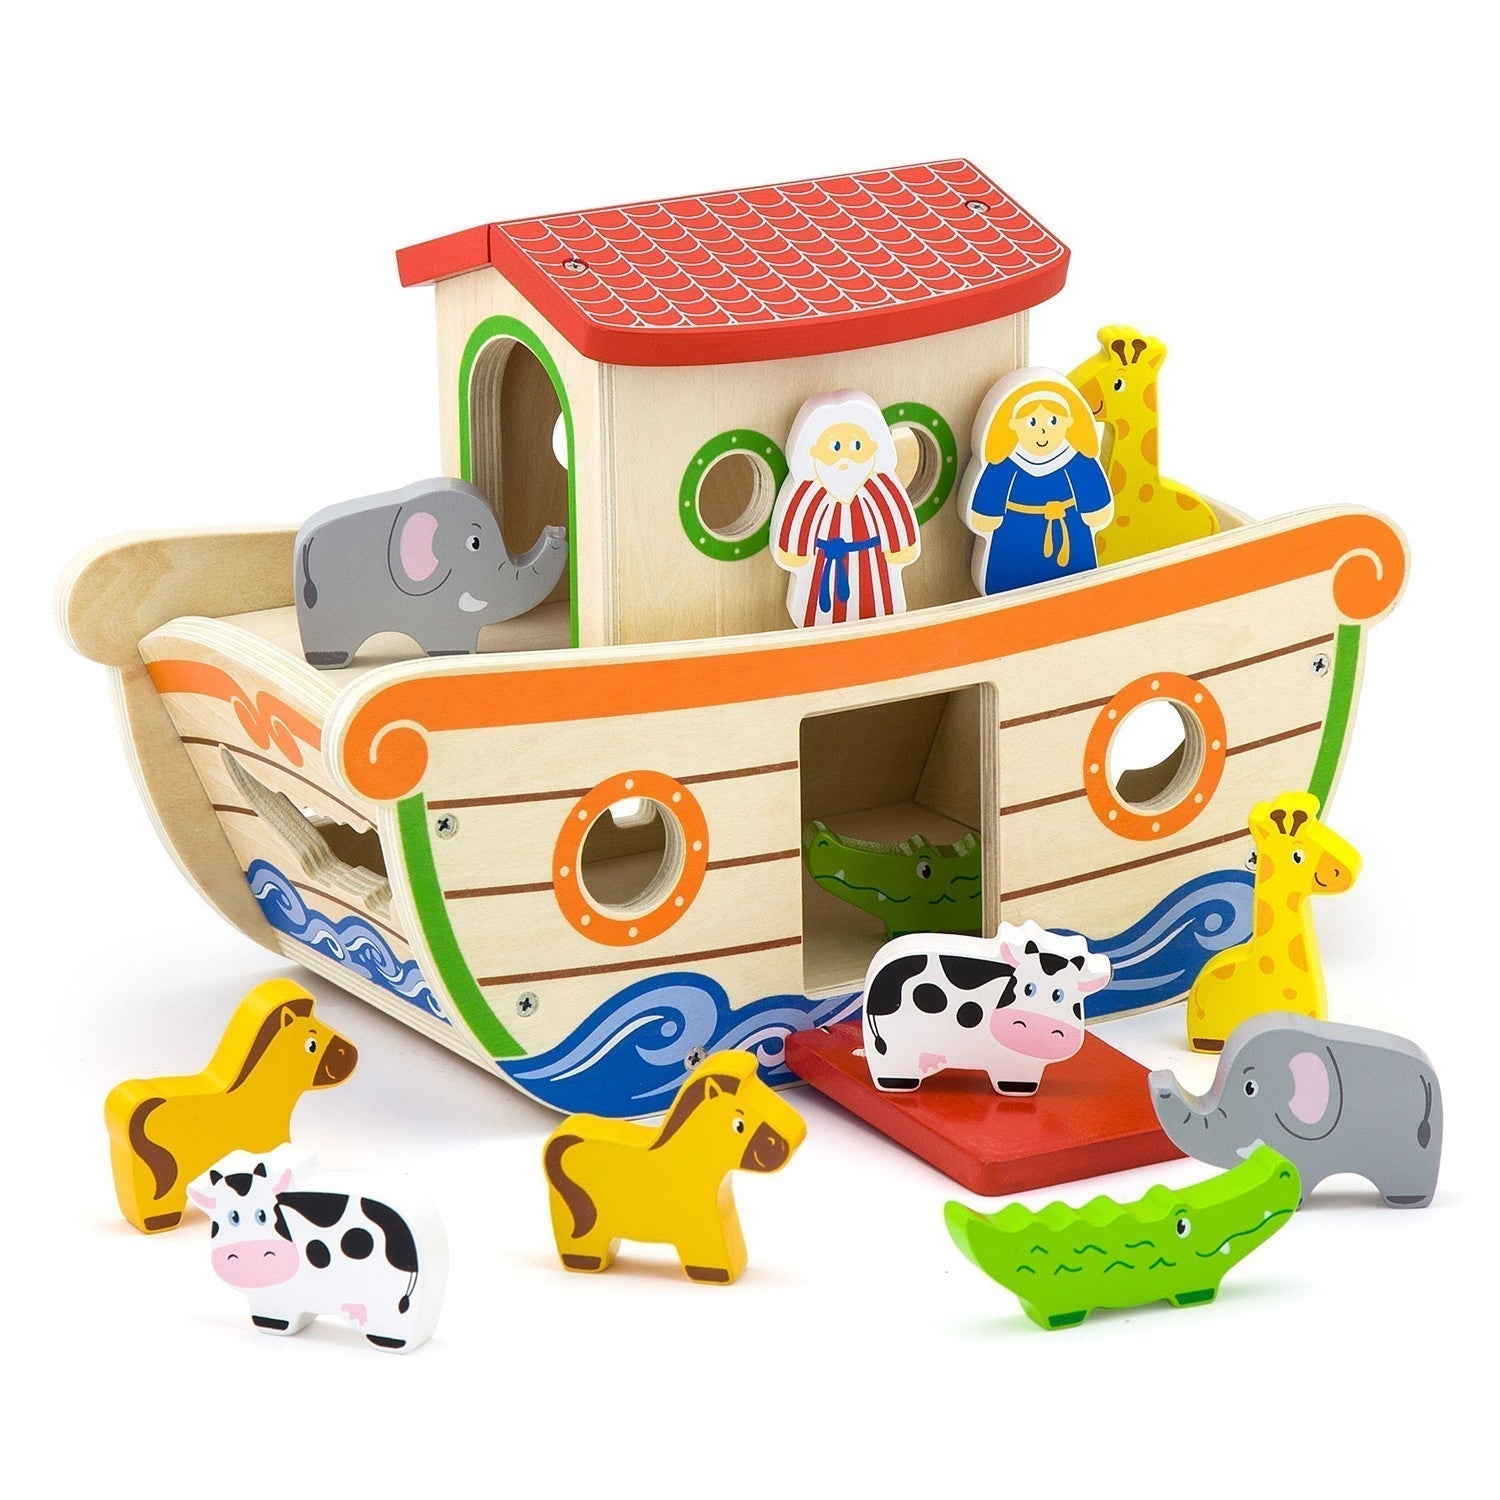 Noahs Ark Shape Sorter, Little hands will love sorting their animal friends with this Noah's Ark Shape Sorter.This durable wooden Noah's Ark Shape Sorter is the perfect companion for little explorers.It includes a chunky wooden Ark, as well as colourful characters to sort into the boat.Little ones will enjoy fitting the animals through the windows, cut-out slots or up the detachable walkway ladder.For even more fun, your little ones can try to pair up the matching animals before hopping on the Ark.This colo